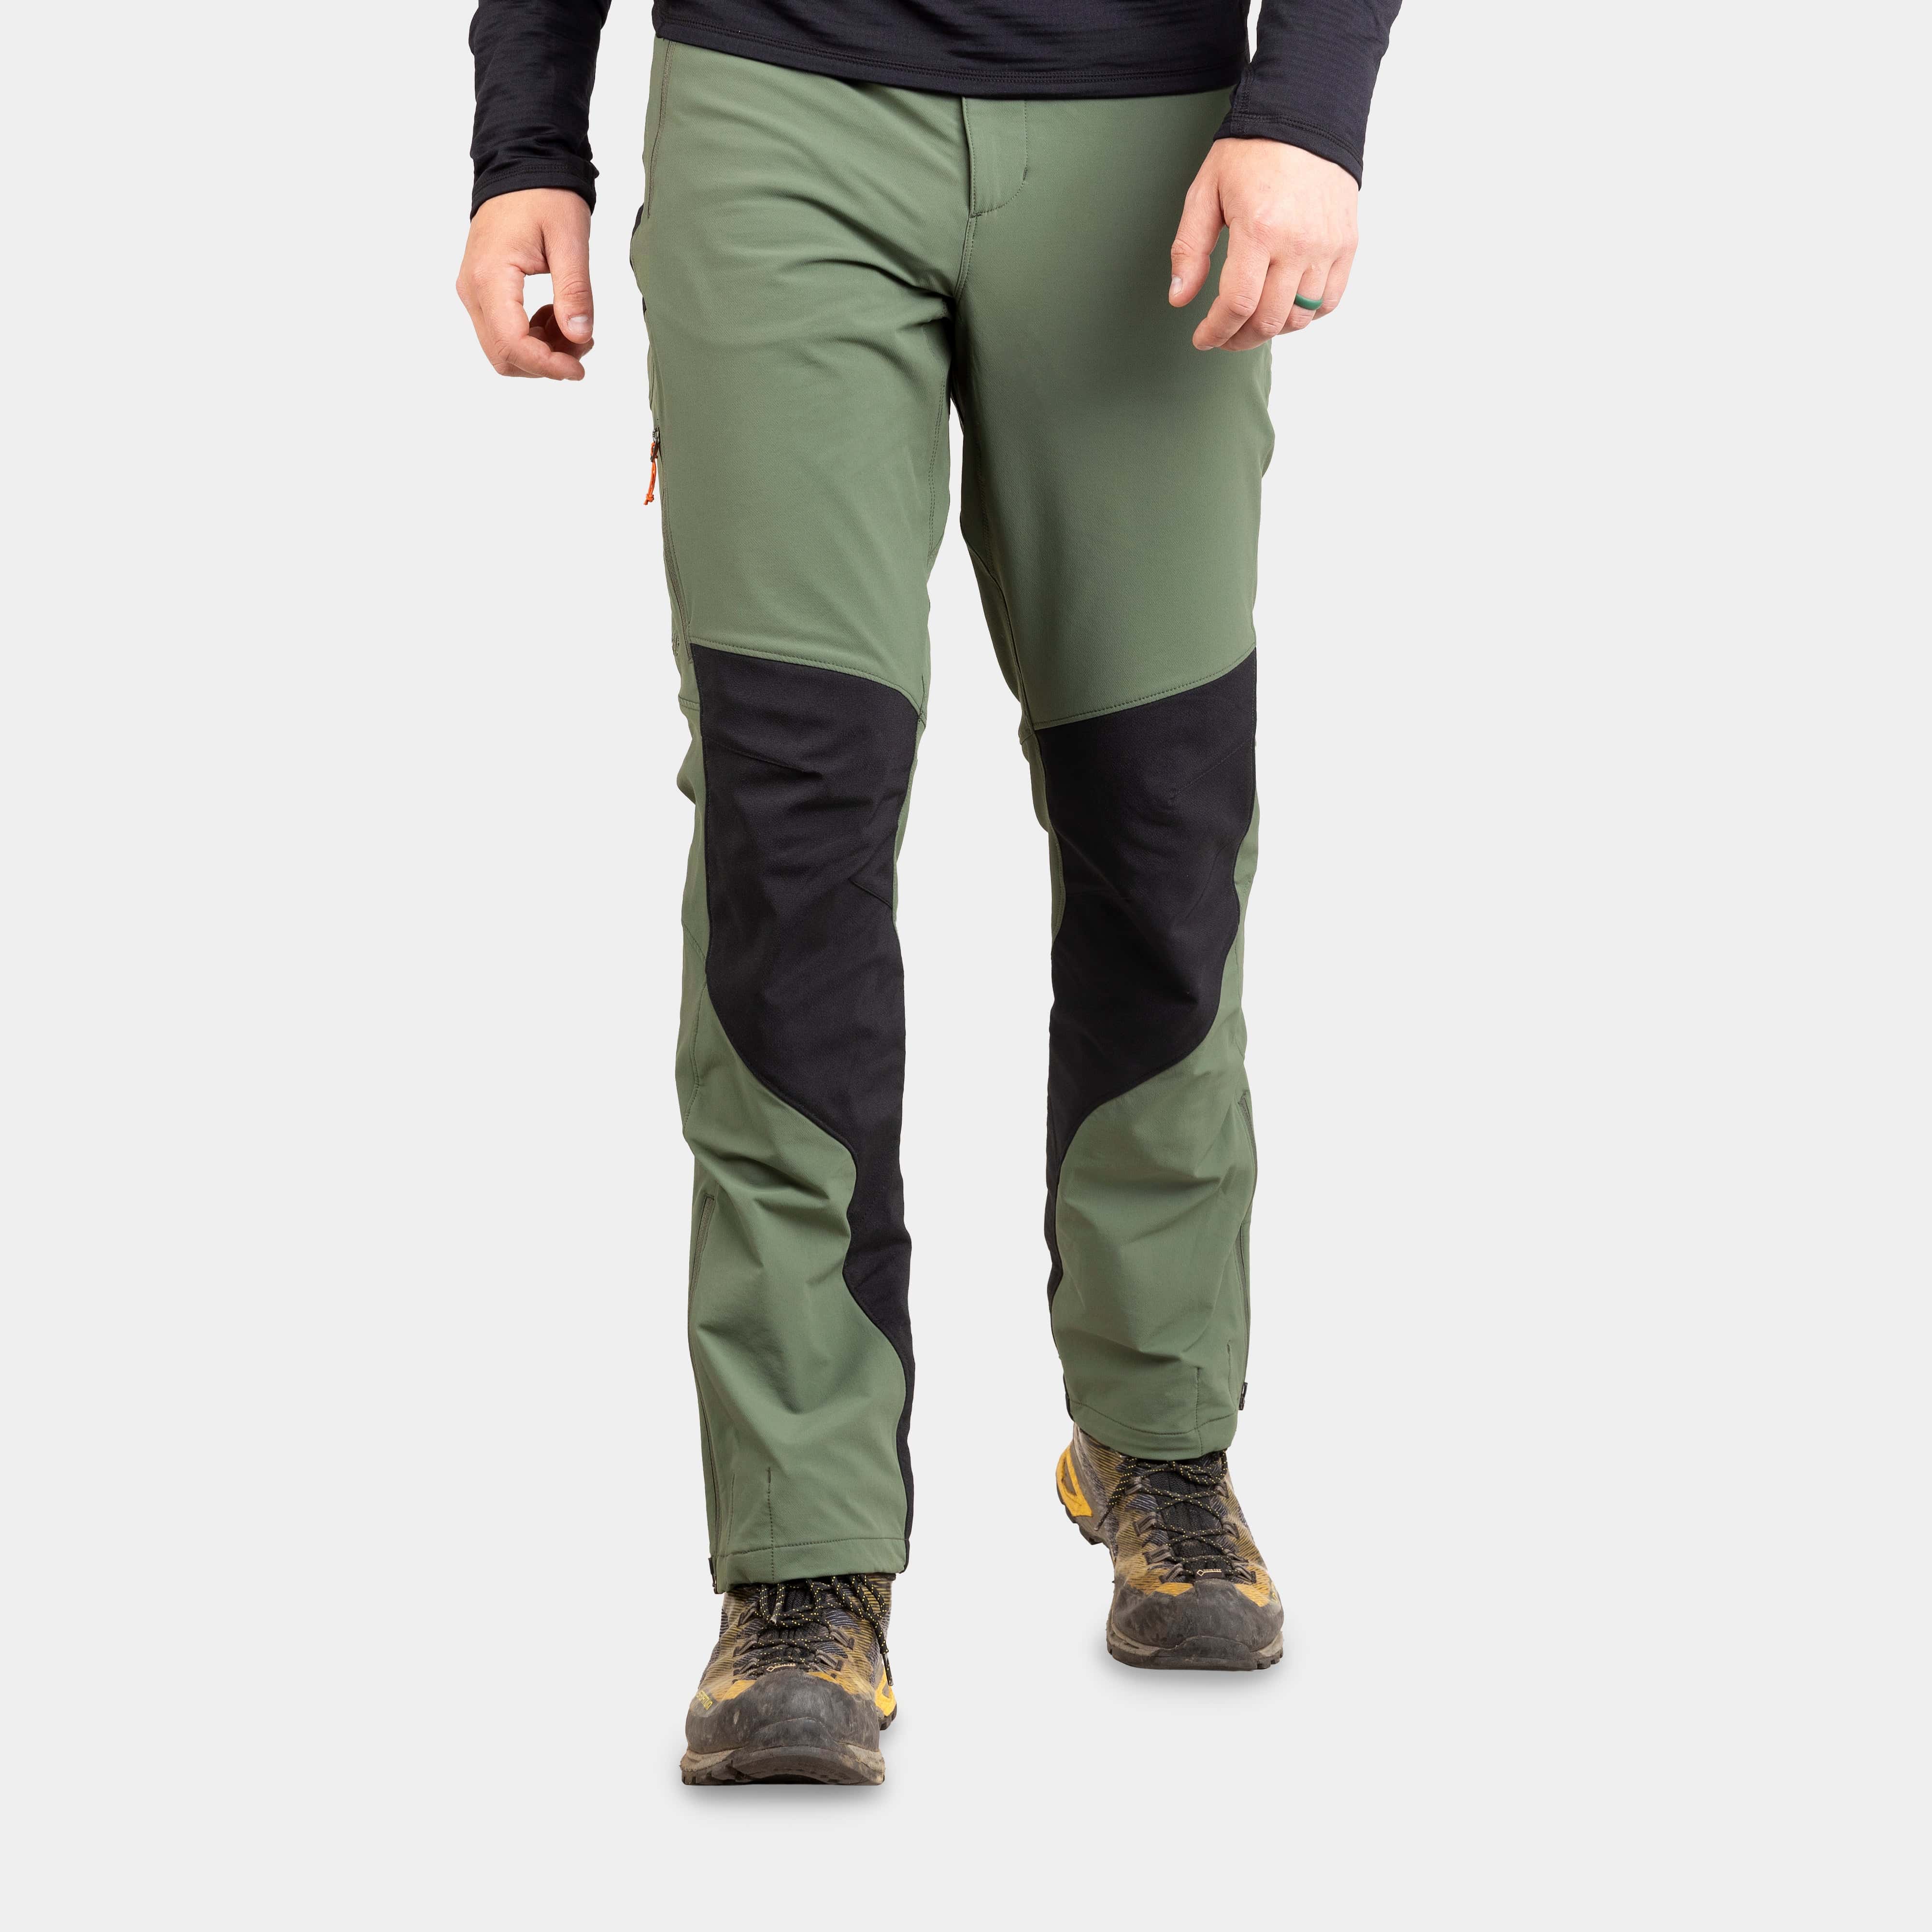 Go Outdoors Mens Trousers